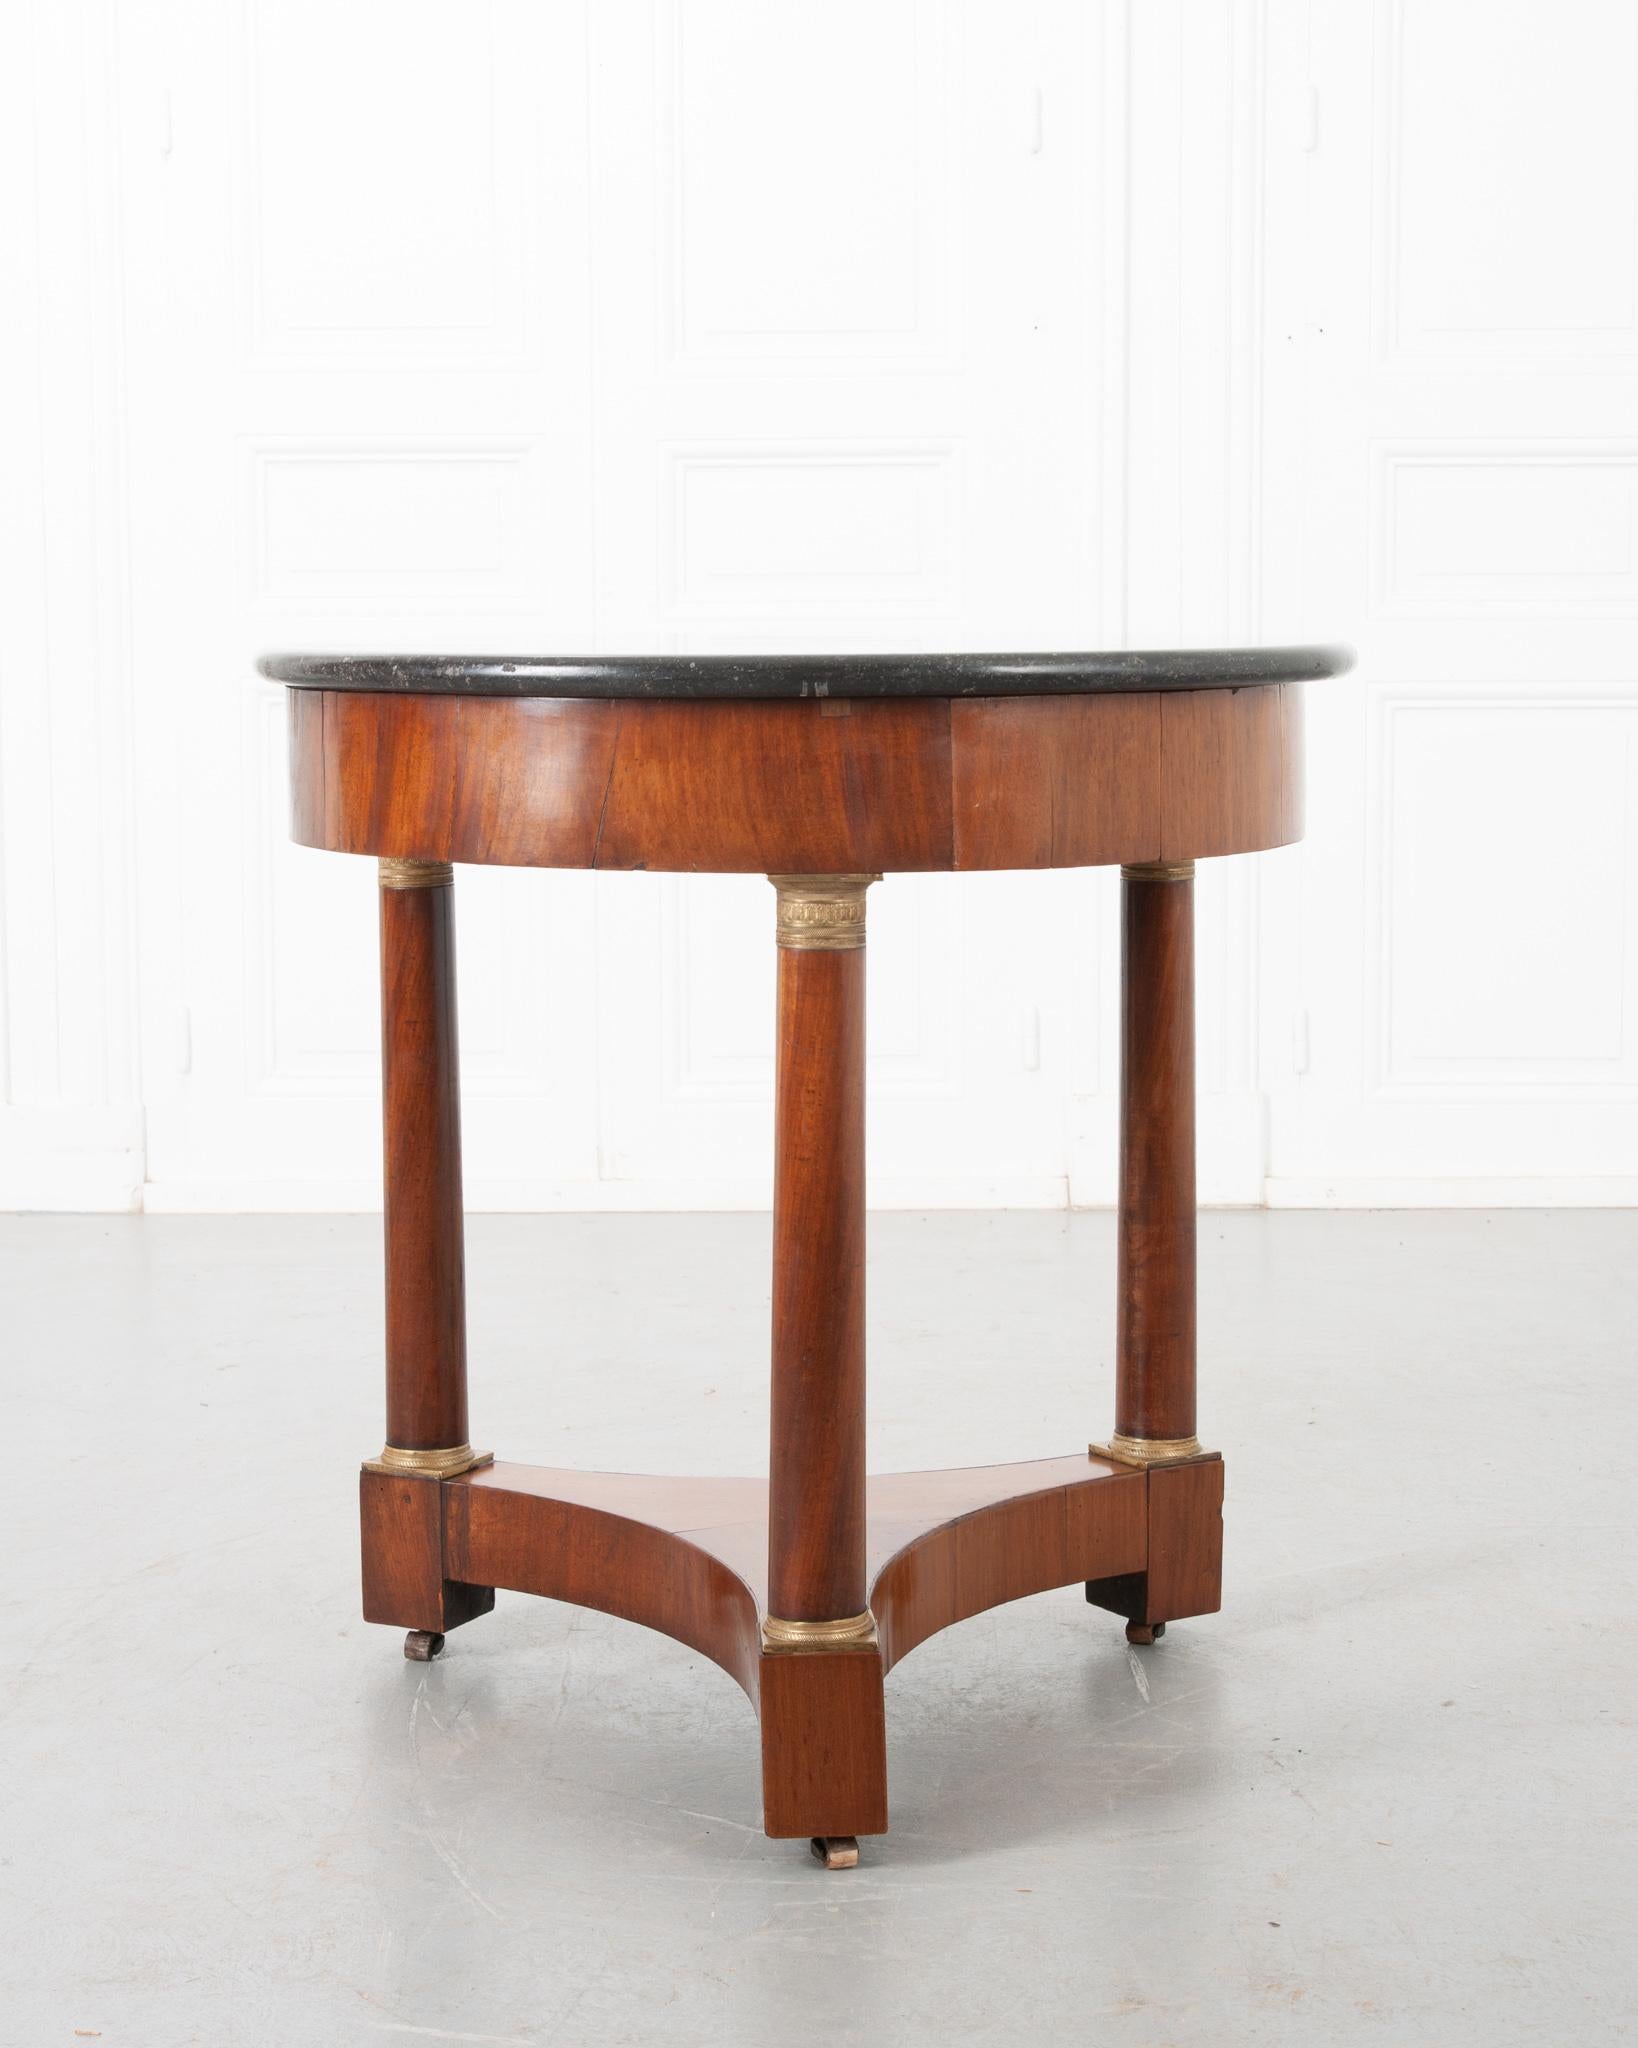 A darling Empire style gueridon table from 19th century France, with round black fossil marble over a simple mahogany apron. The three columnar legs have decorative brass ormolu capitals and bases, resting on a three-sided, concave shaped stretcher